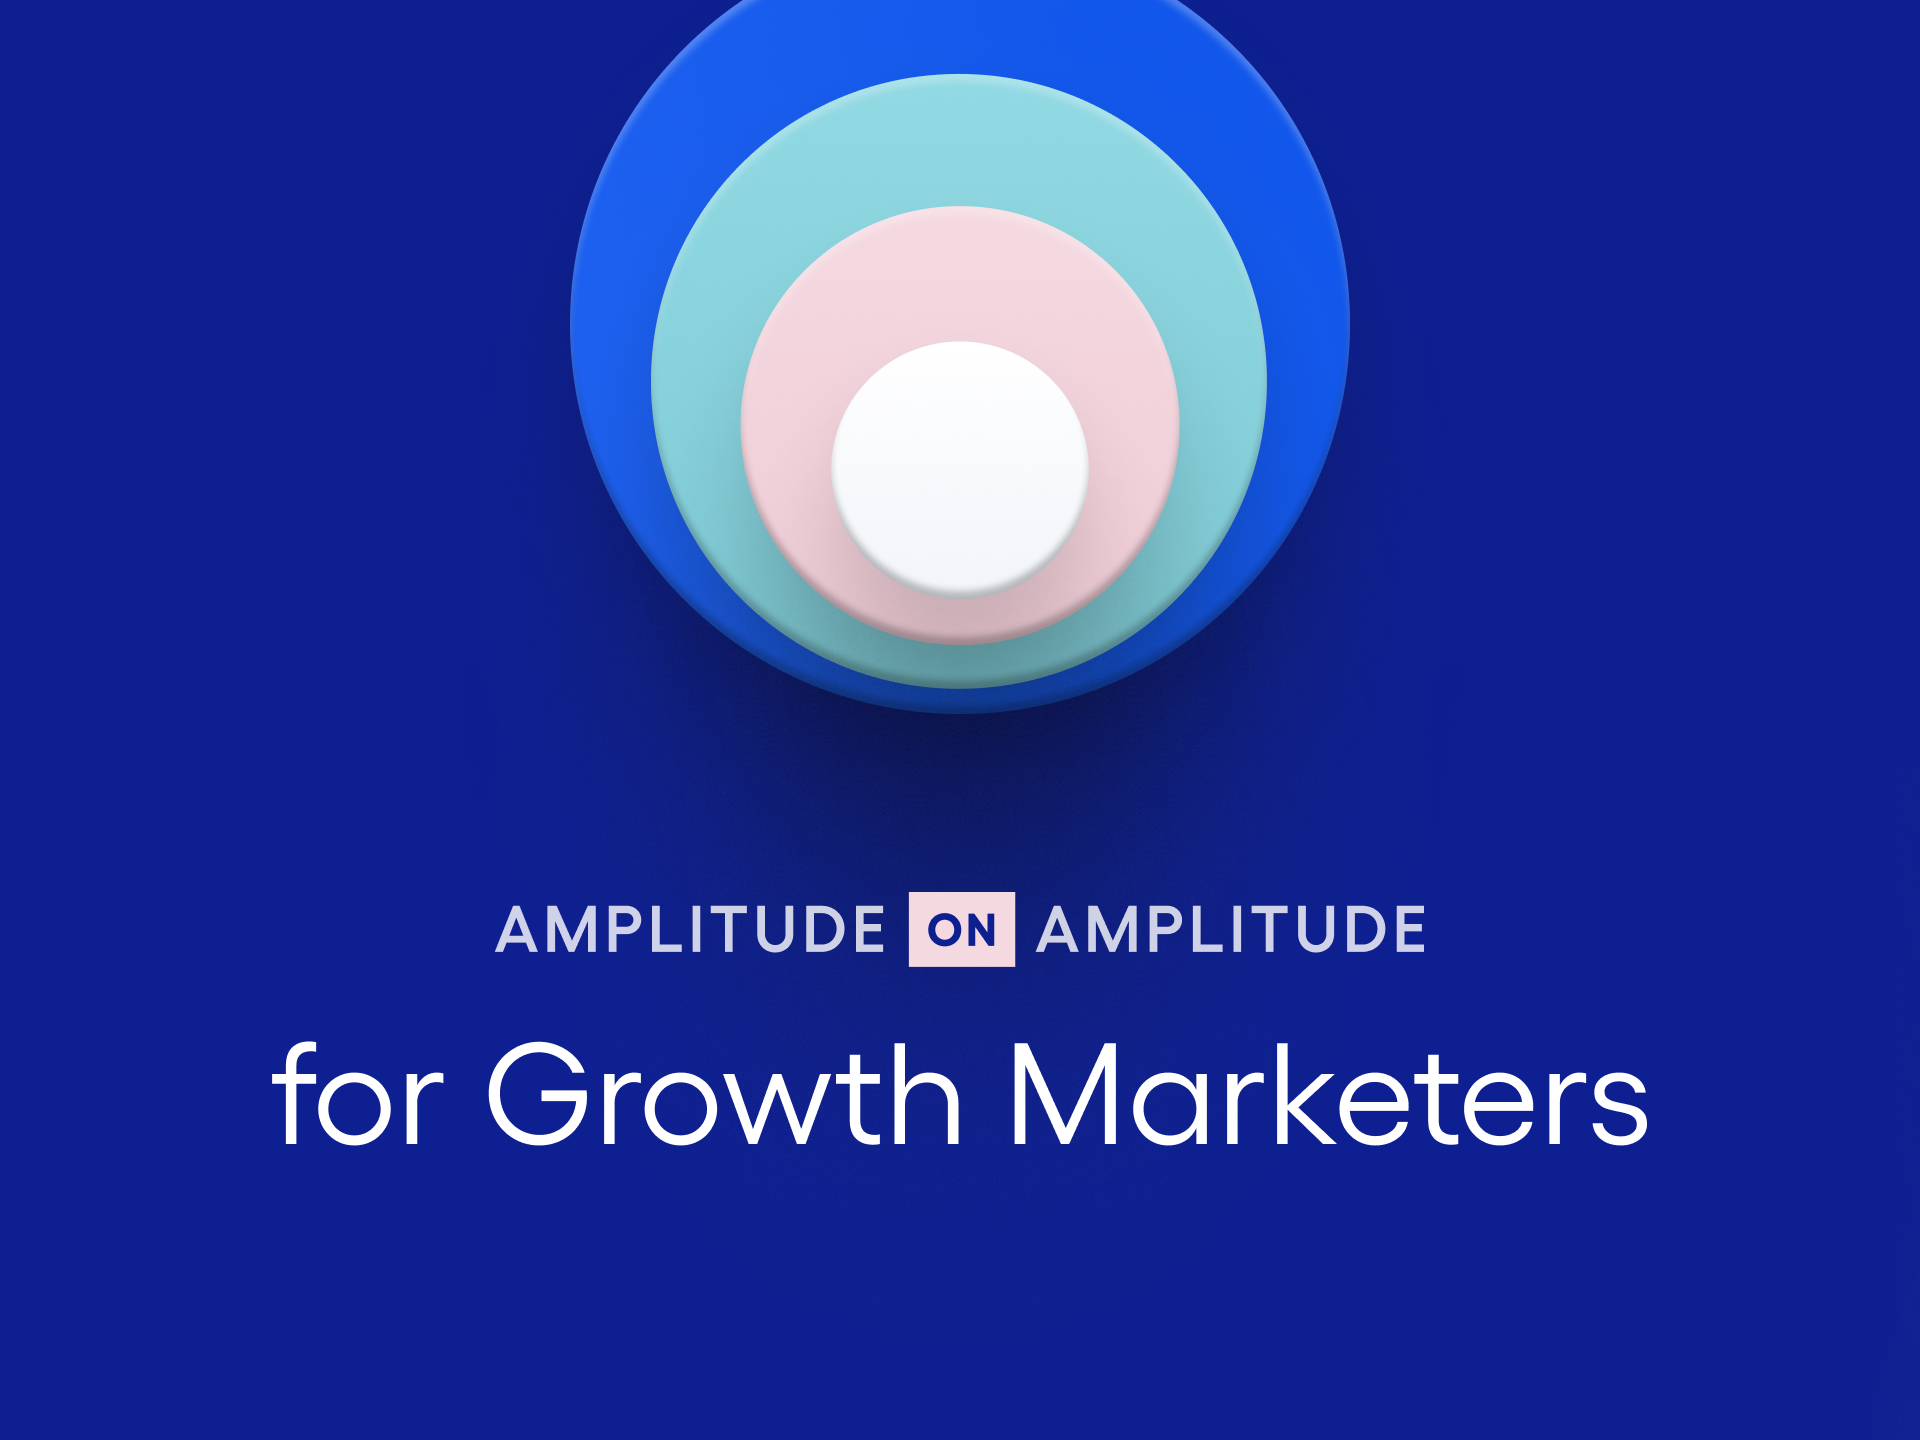 Amplitude on Amplitude for Growth Marketers with concentric circles